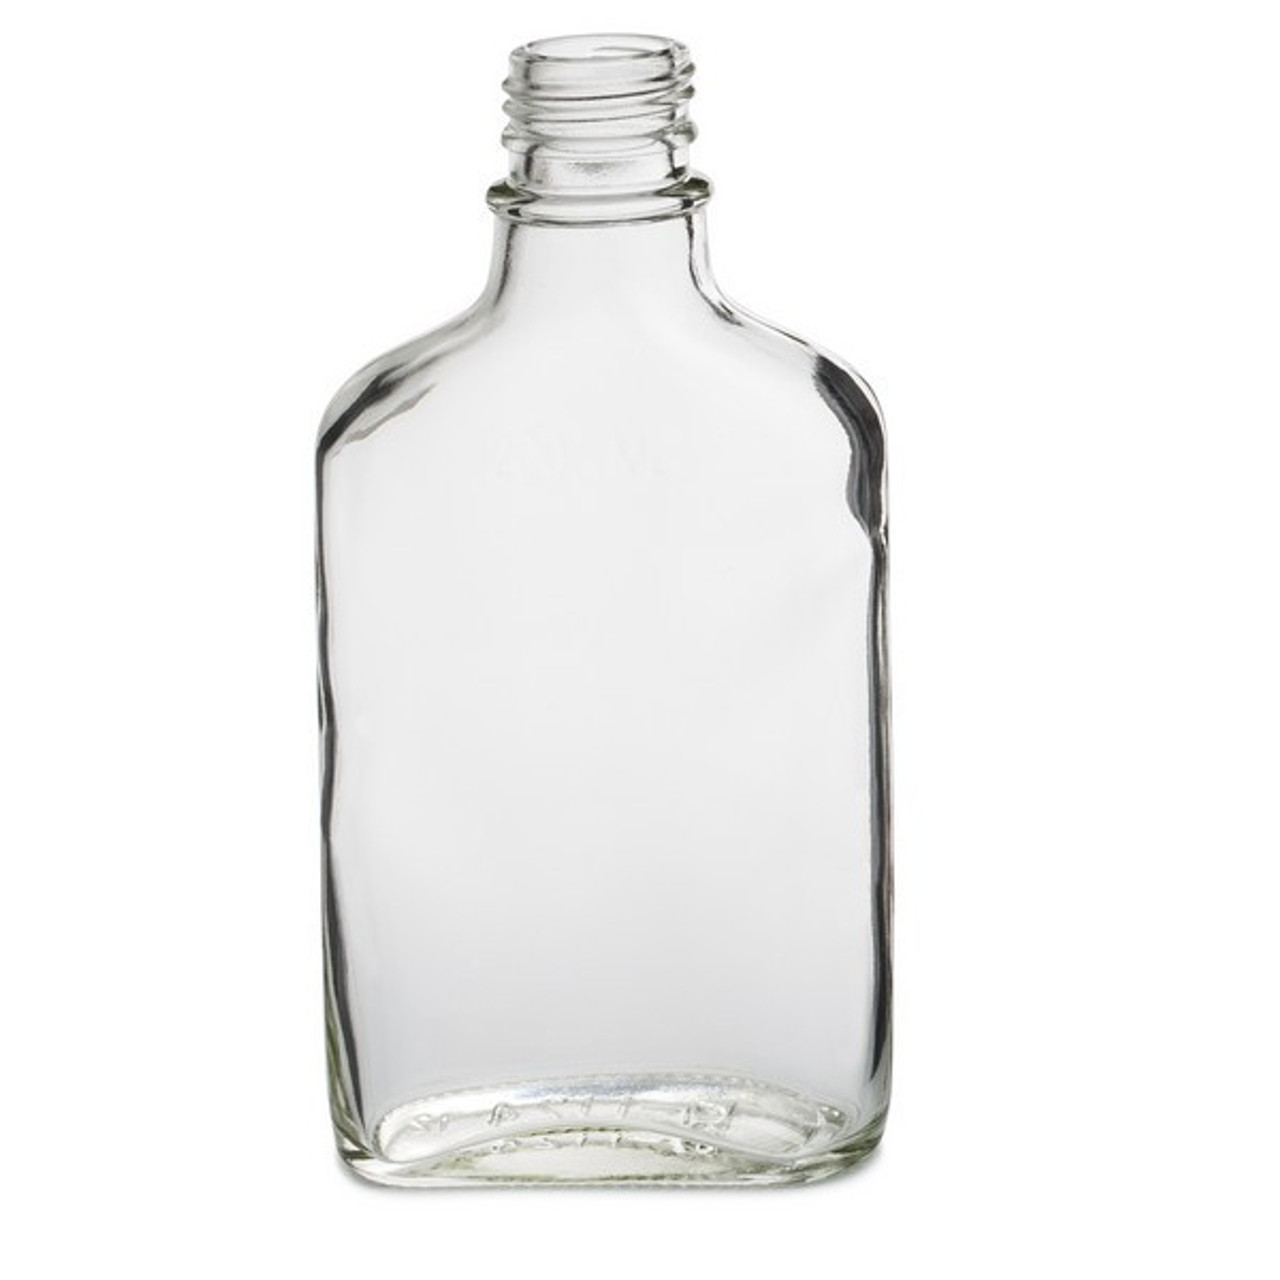 200ml Clear Glass Flask Bottles (Cap Not Included) - 6/Case, Clear Type III 28 mm